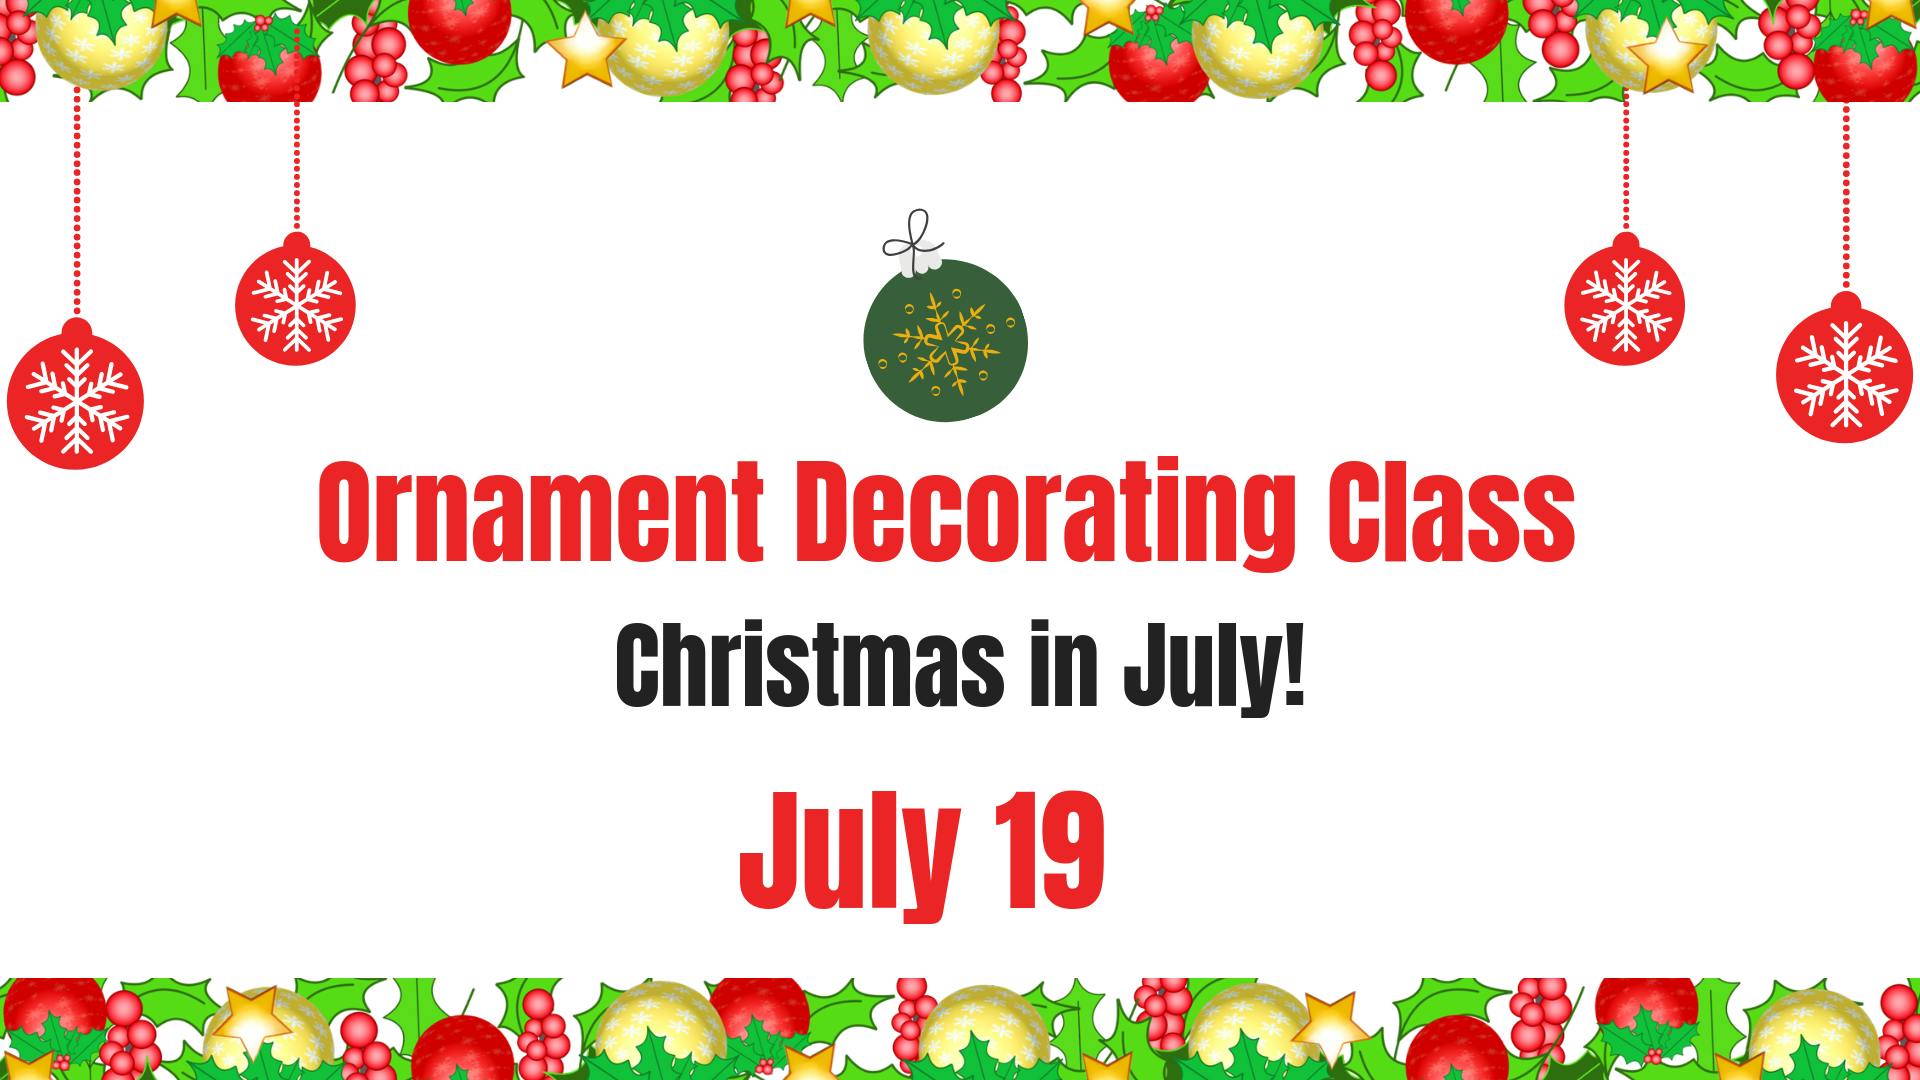 Ornament Decorating - Christmas in July